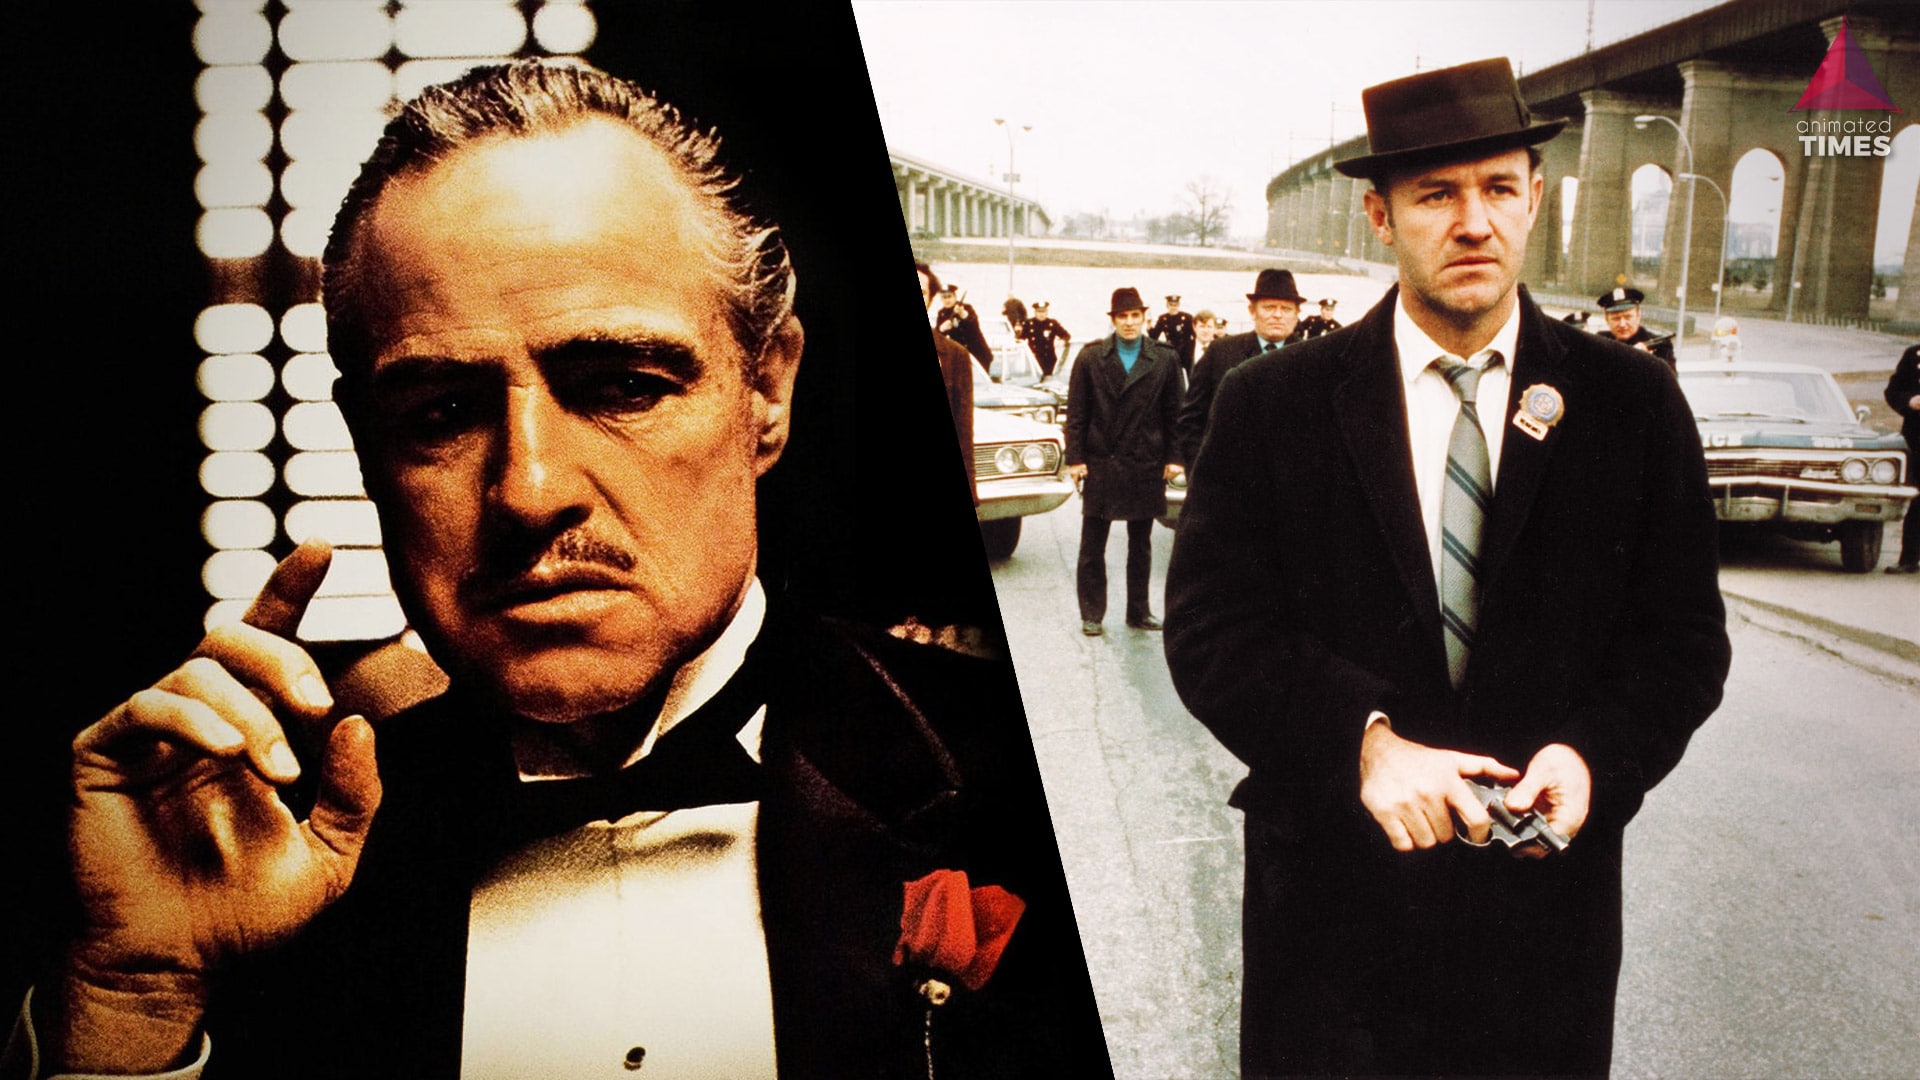 Say Hello To My Little Friend: 10 Greatest Gangster Movies Of All Time, Ranked